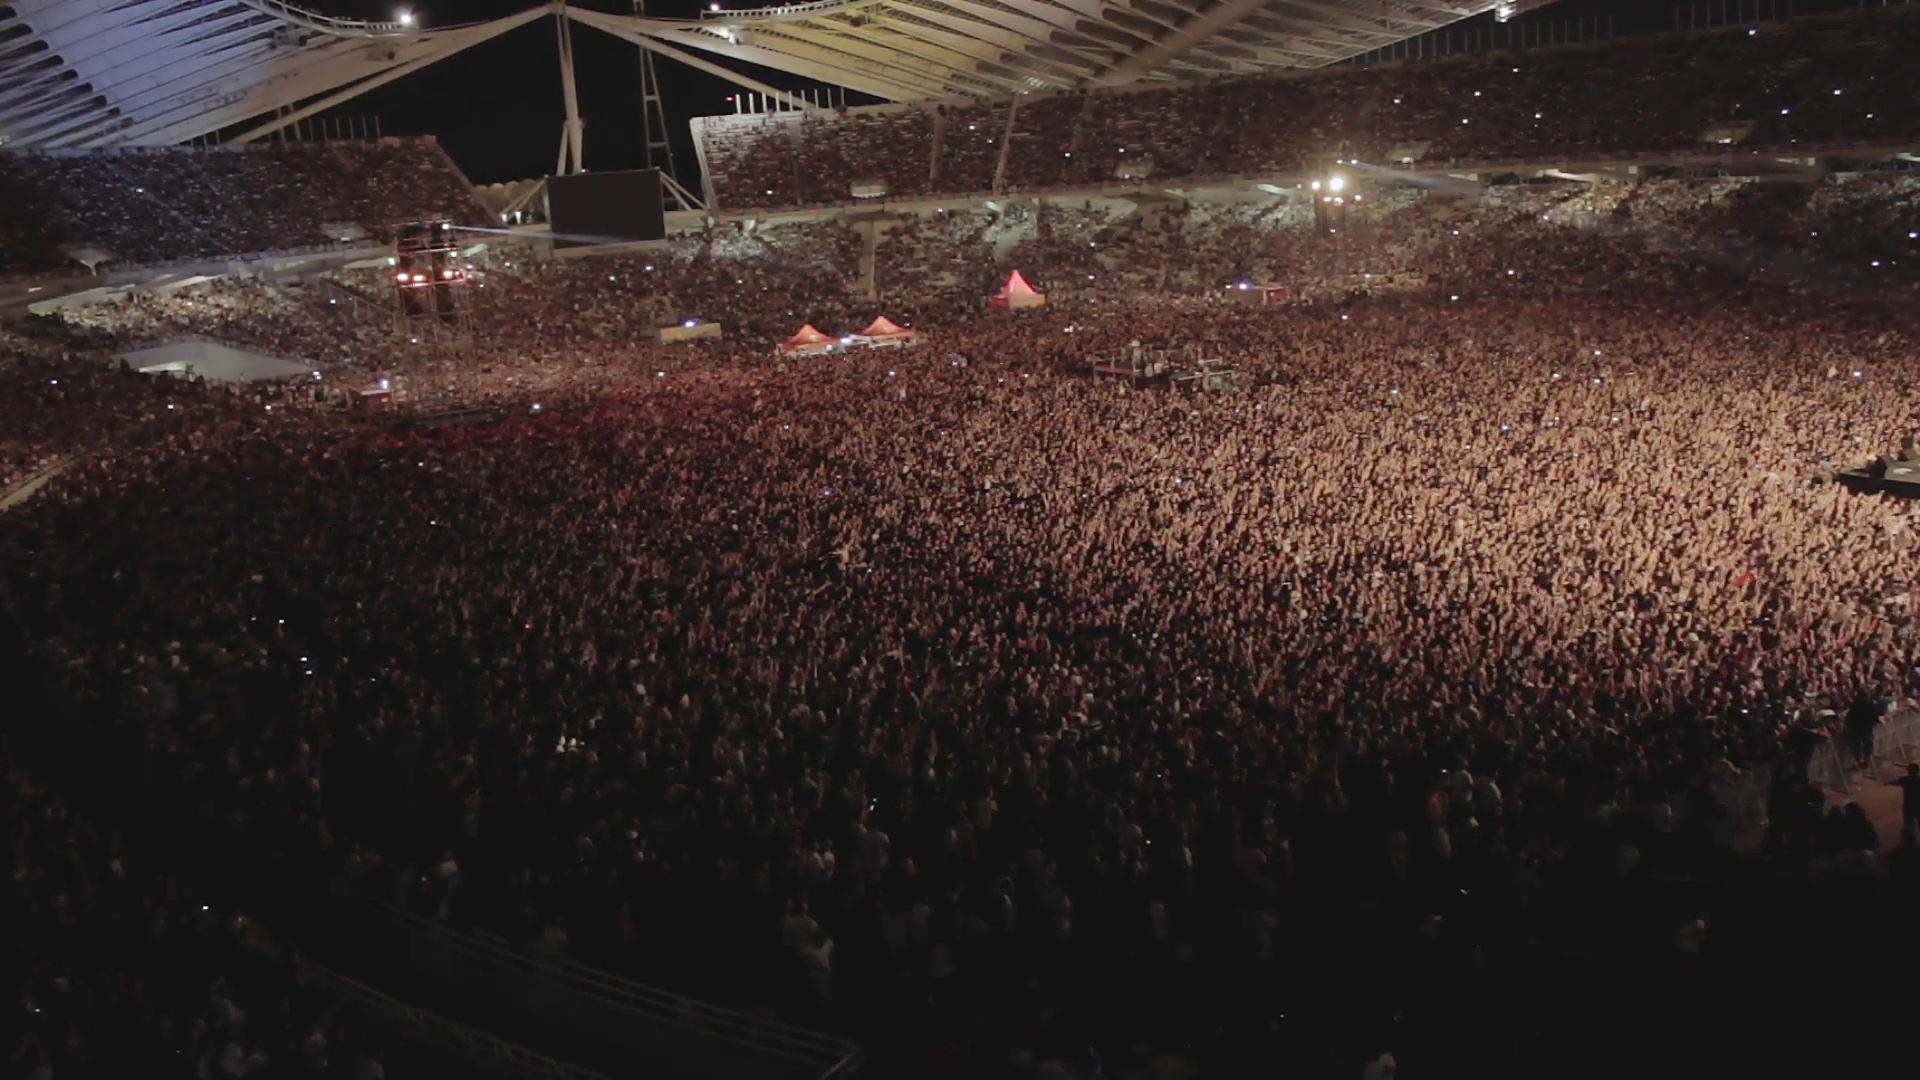 huge-crowd-of-people-at-concert-full-stadium-arena-overviewaerial-view-of-one-of-the-biggest-crowds-in-a-live-outdoors-rock-concert-in-athens-greece-at-the-olympics-stadium_vyrwvyjp__F0000.png